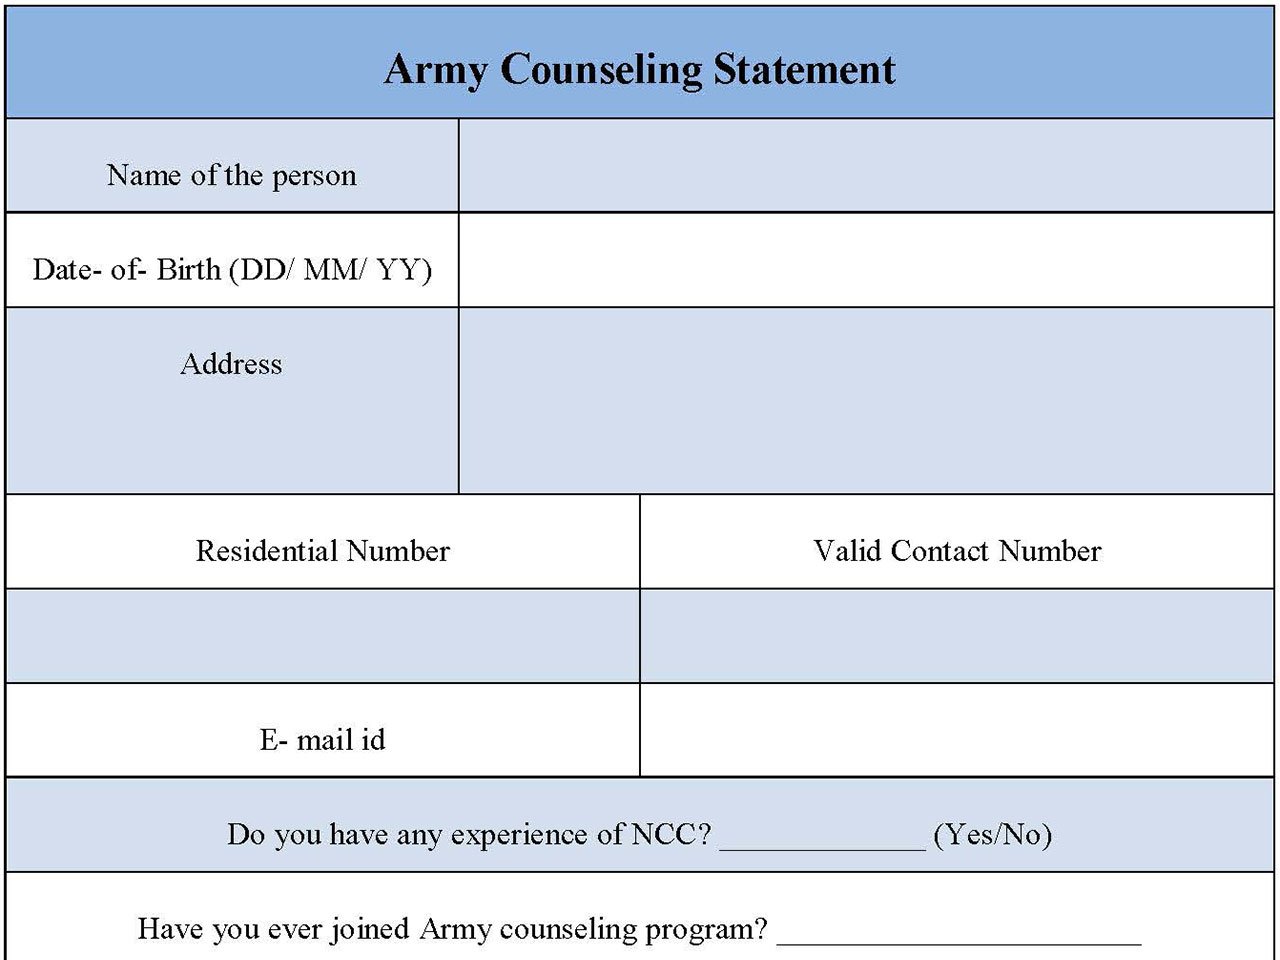 Army counselling statement form